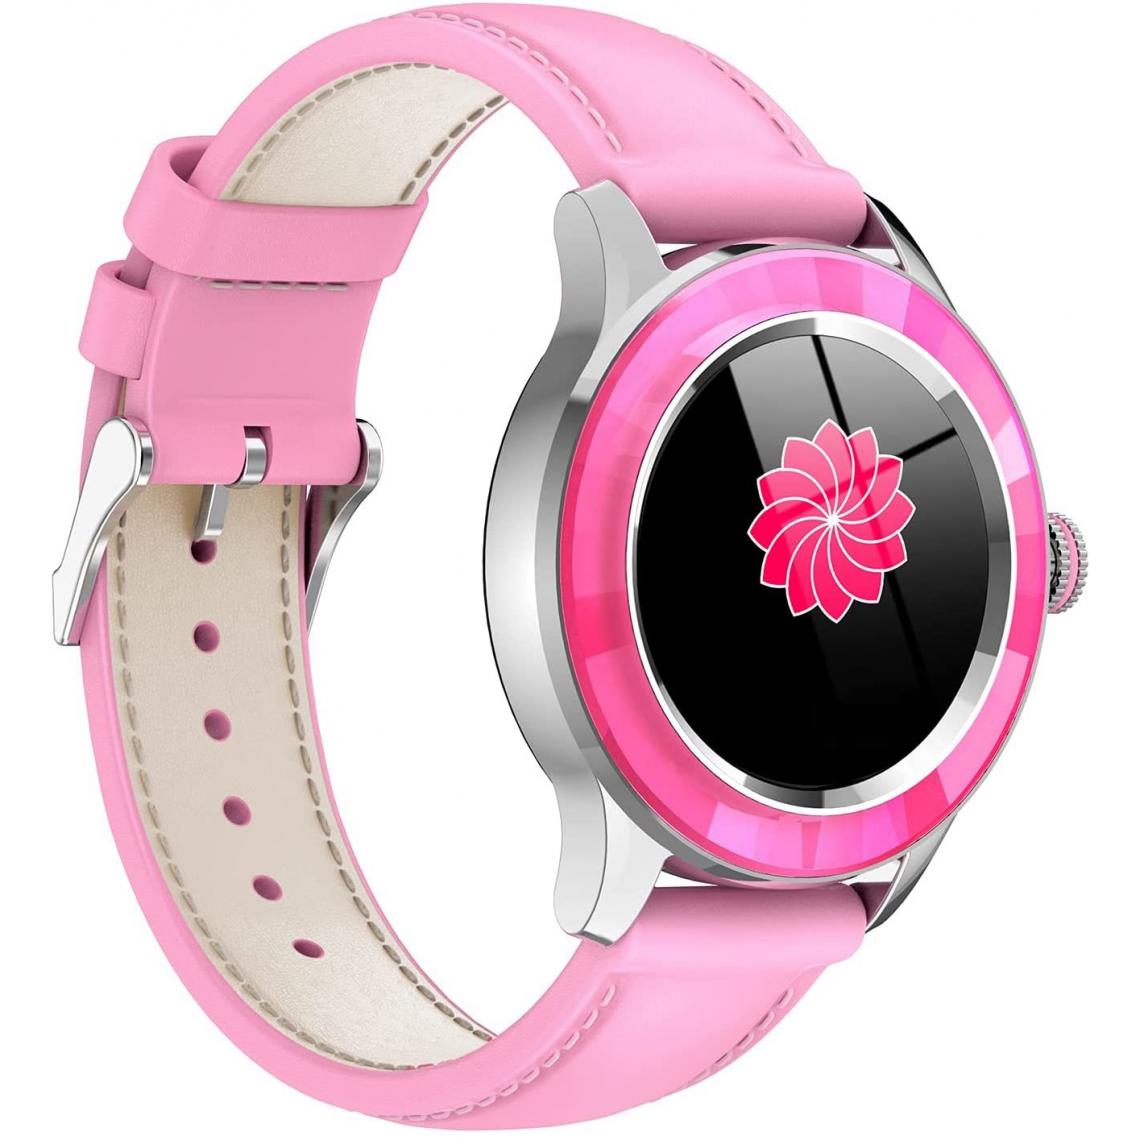 Chronotech Montres - Chronus Smart Watch women elegant high quality IP67 waterproof with fitness tracker, heart rate sleep monitor, calorie step counter(Rose) - Montre connectée